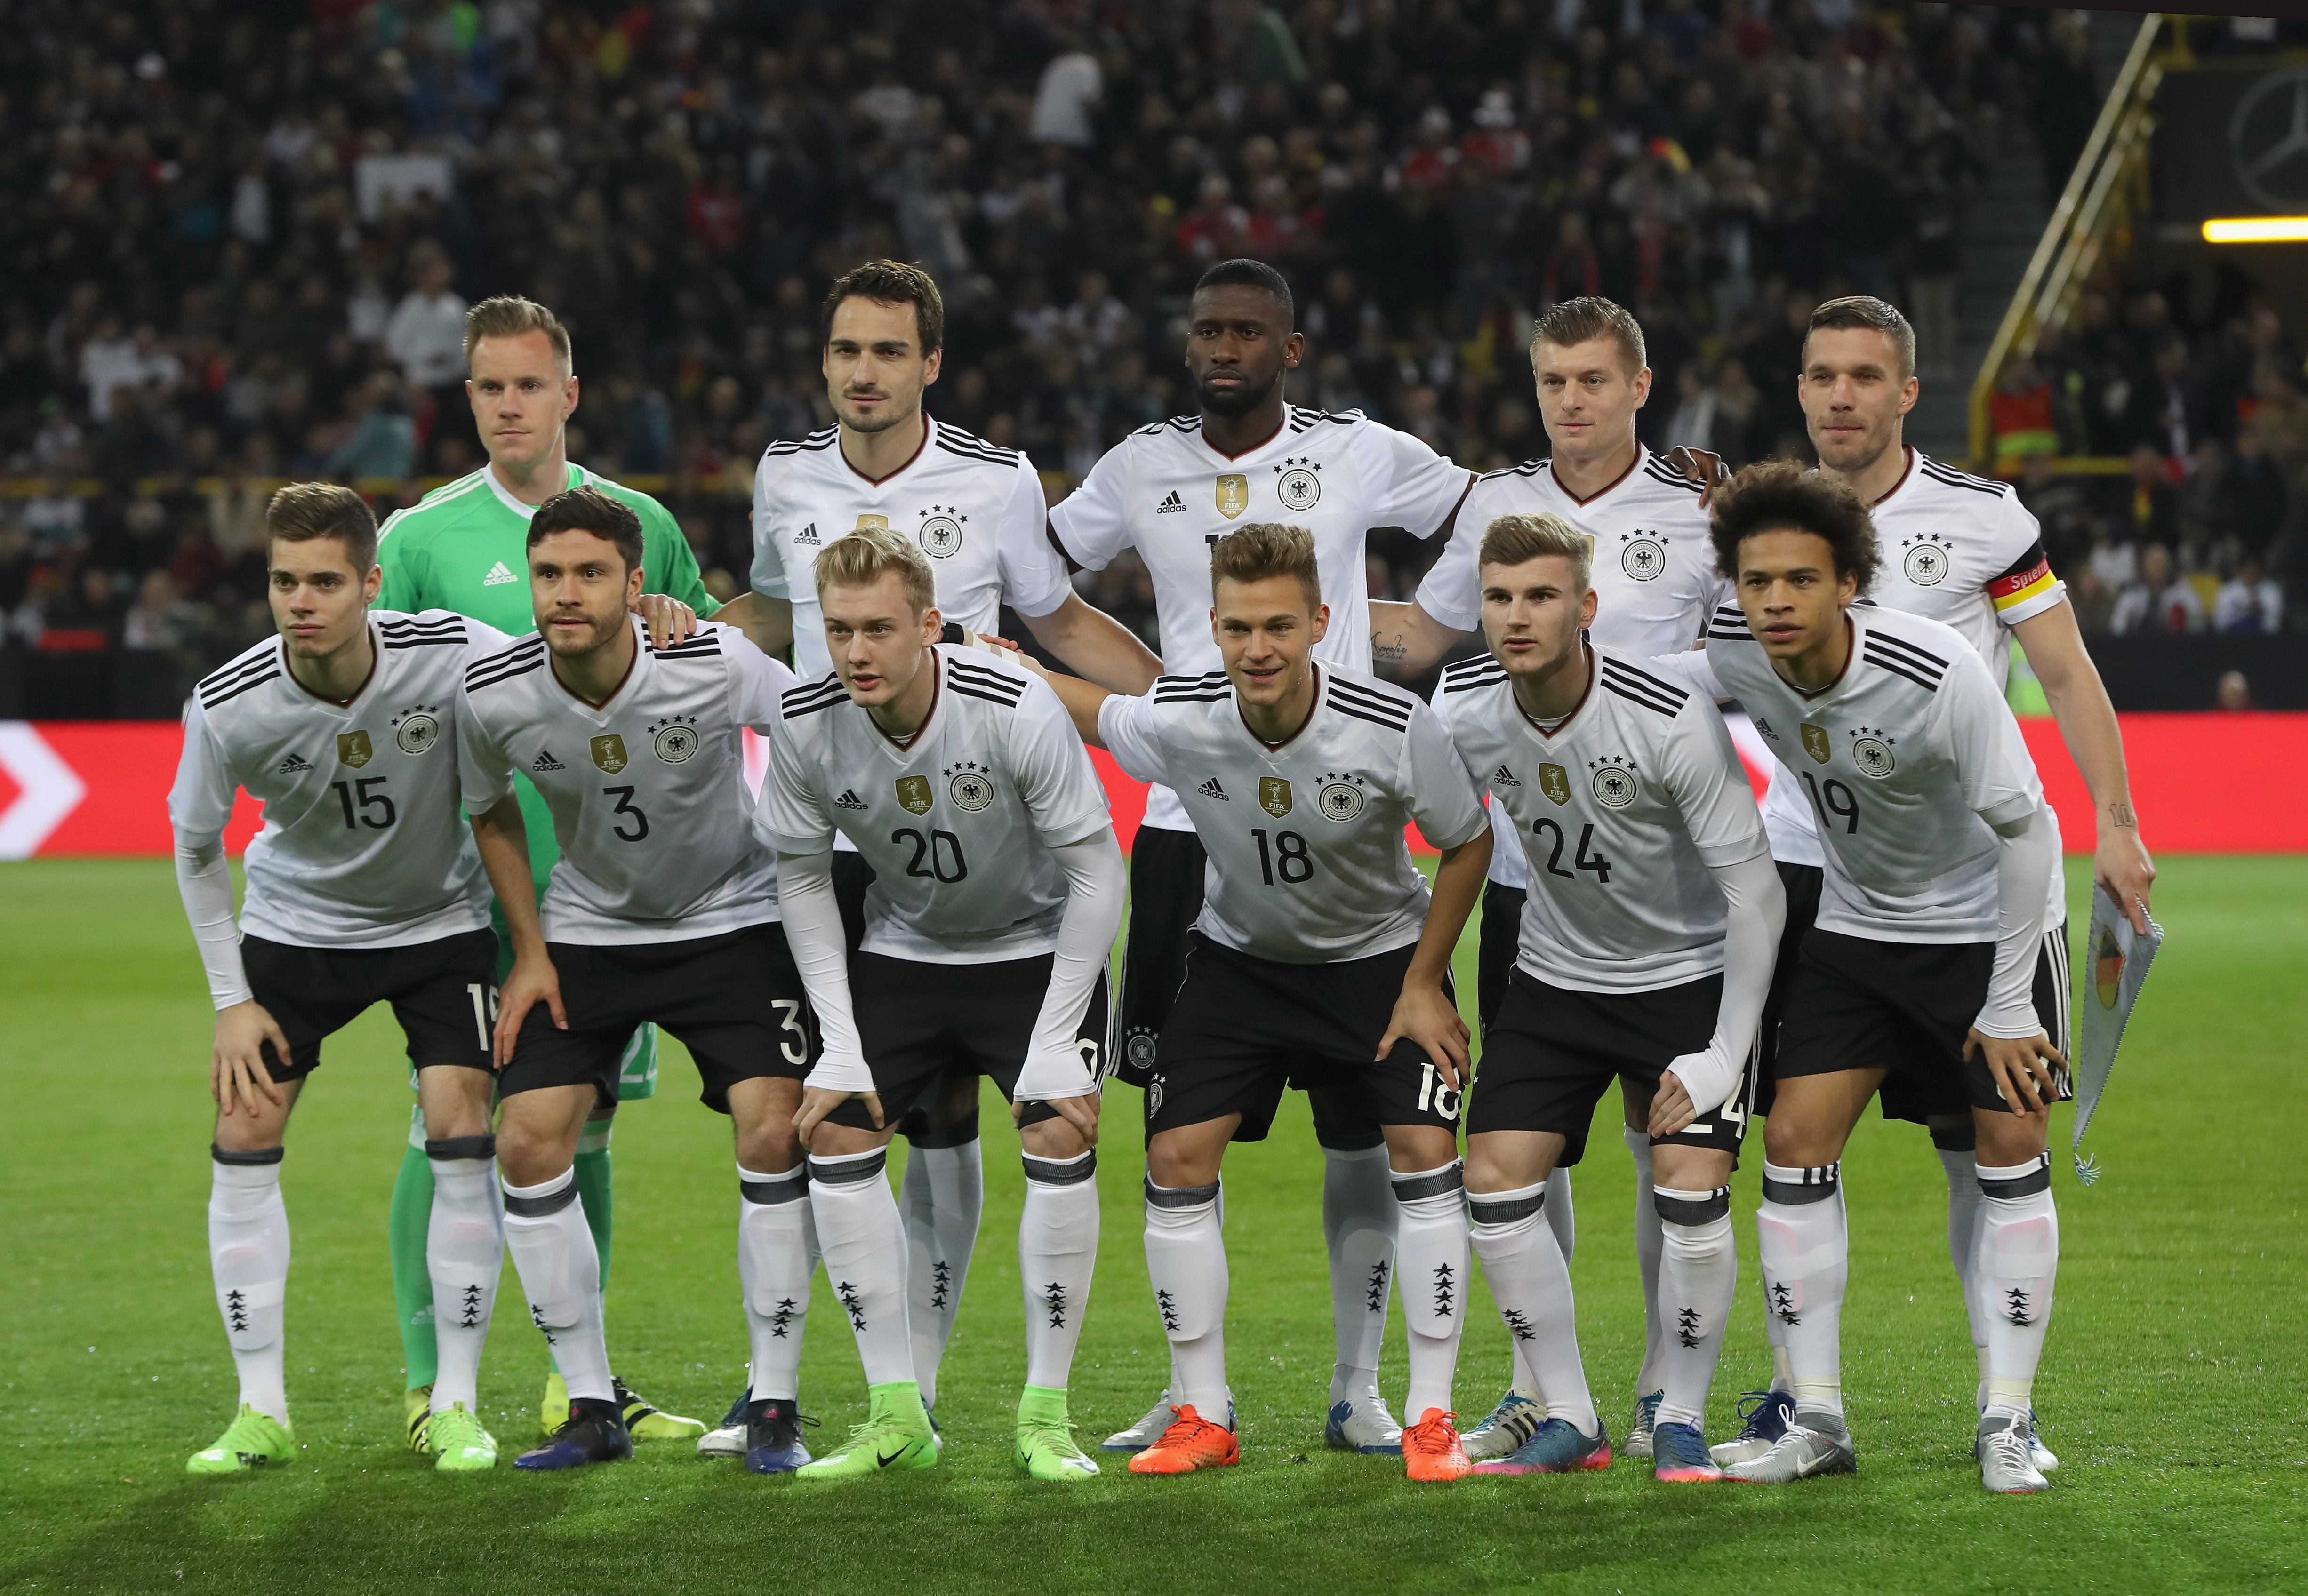 DORTMUND, GERMANY - MARCH 22: The Germany team pose for a photograph prior to the international friendly match between Germany and England at Signal Iduna Park on March 22, 2017 in Dortmund, Germany.  (Photo by Maja Hitij/Bongarts/Getty Images)